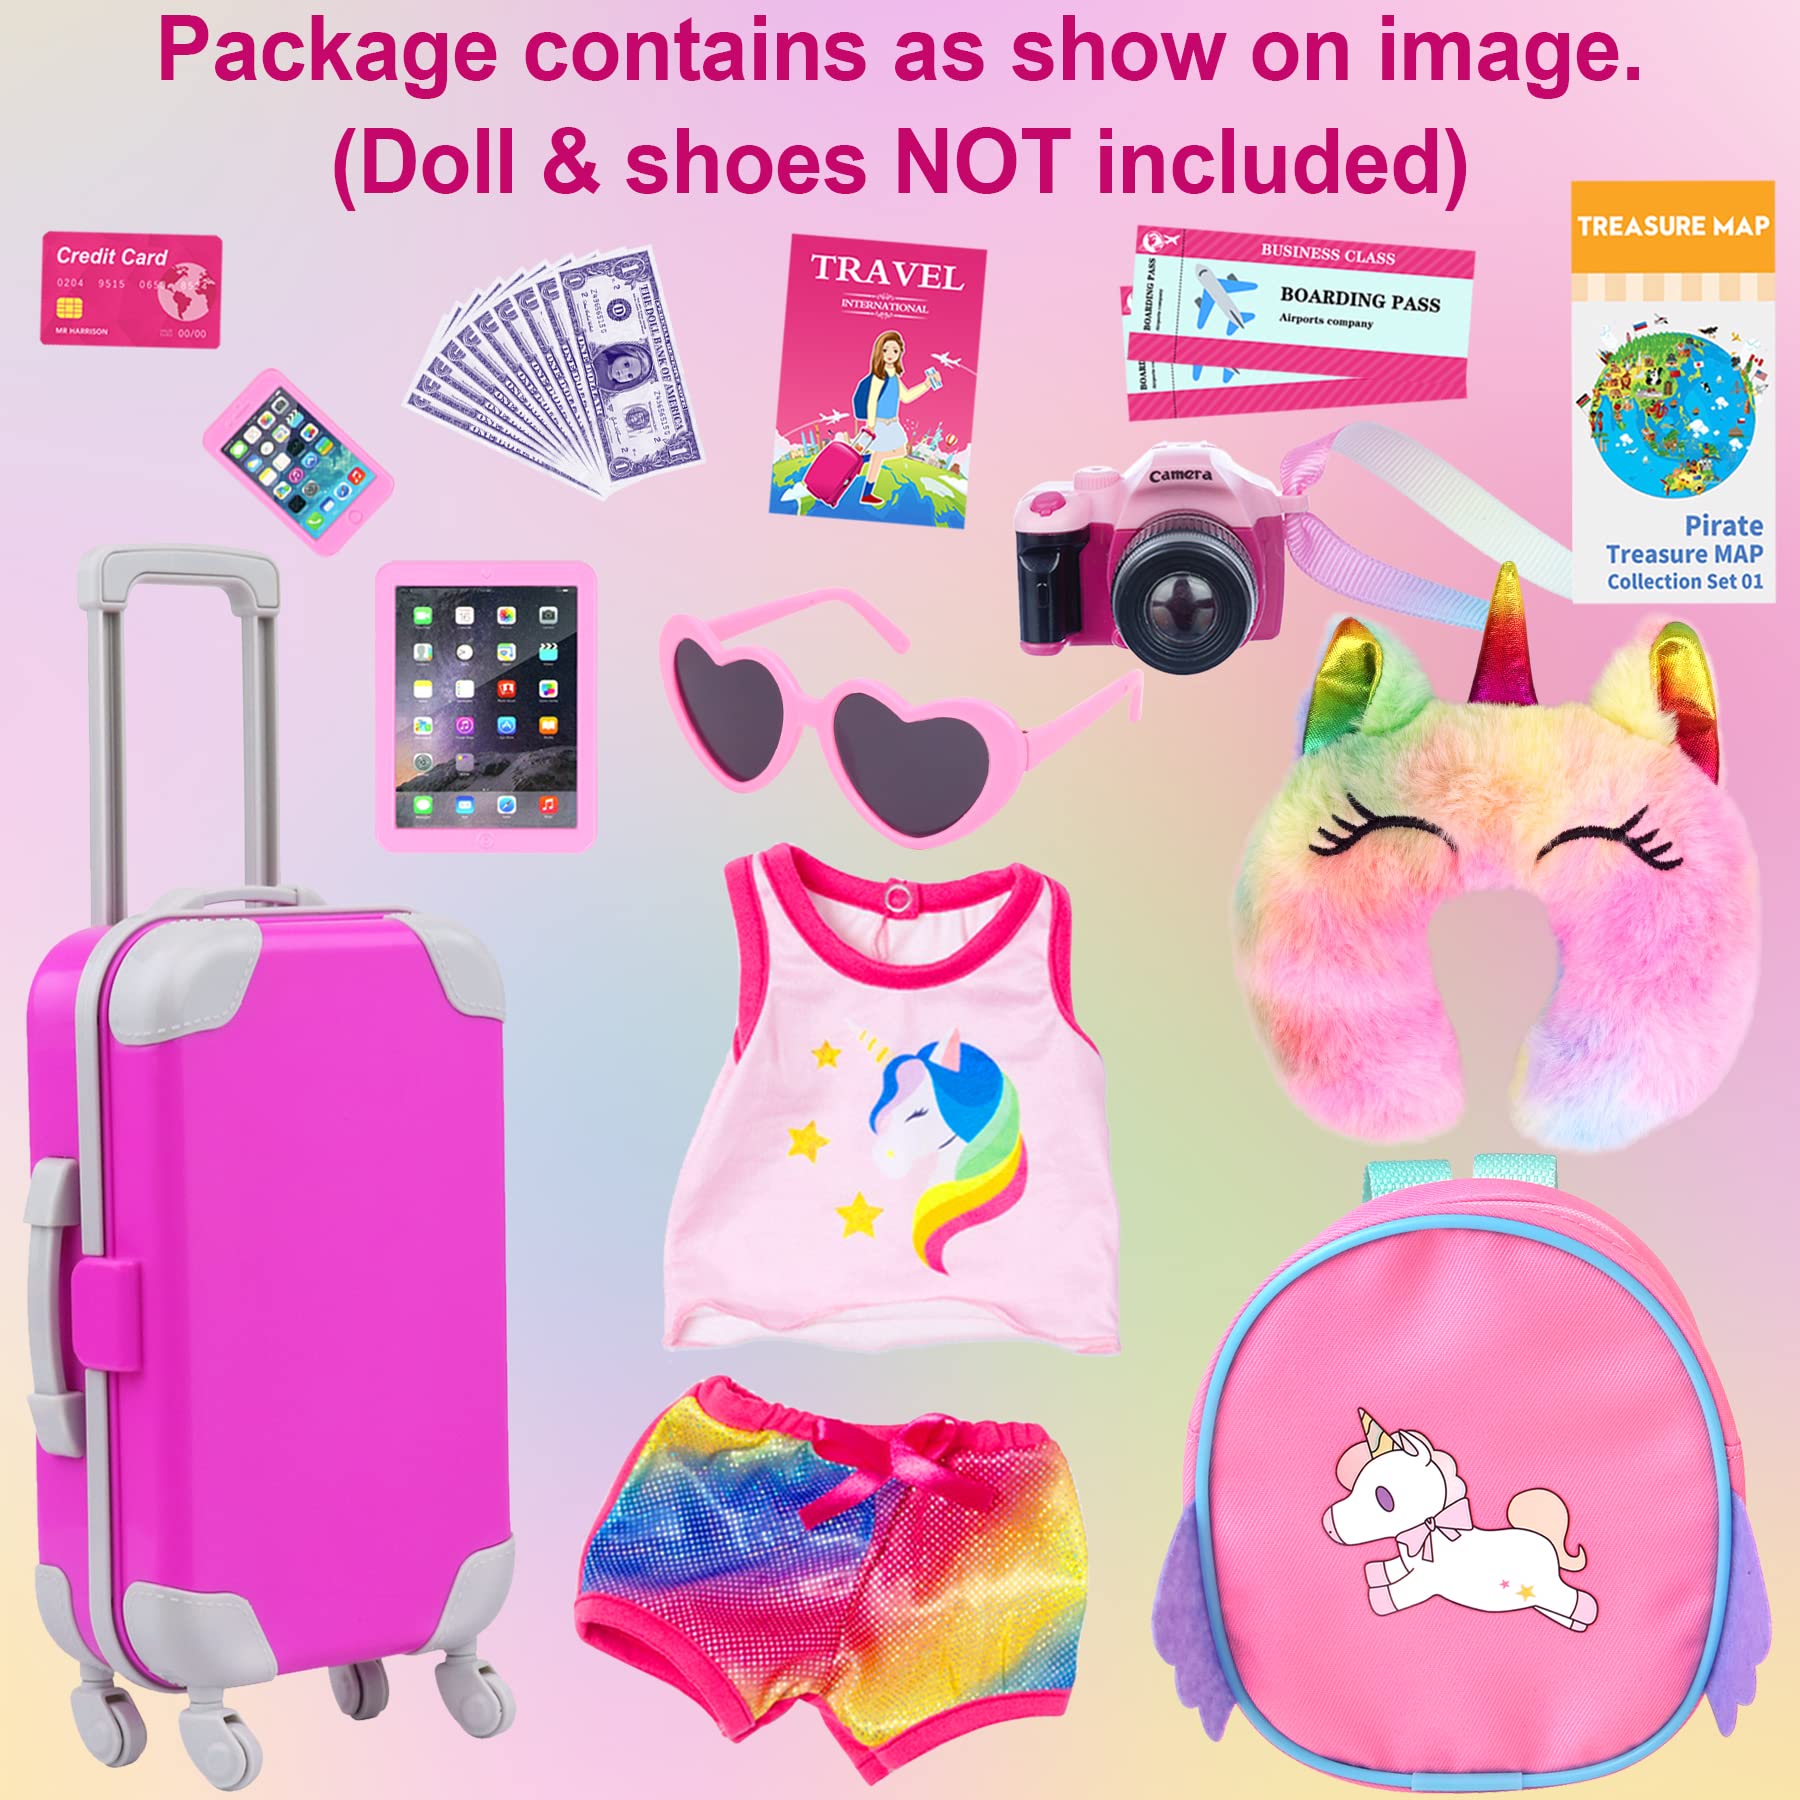 UNICORN ELEMENT 23 Pcs 18 Inch Girl Doll Accessories Suitcase Travel Set Including Clothes Suitcase Backpack Camera Ipad Cell Phone Neck Pillow Sunglasses and Other Travel Set